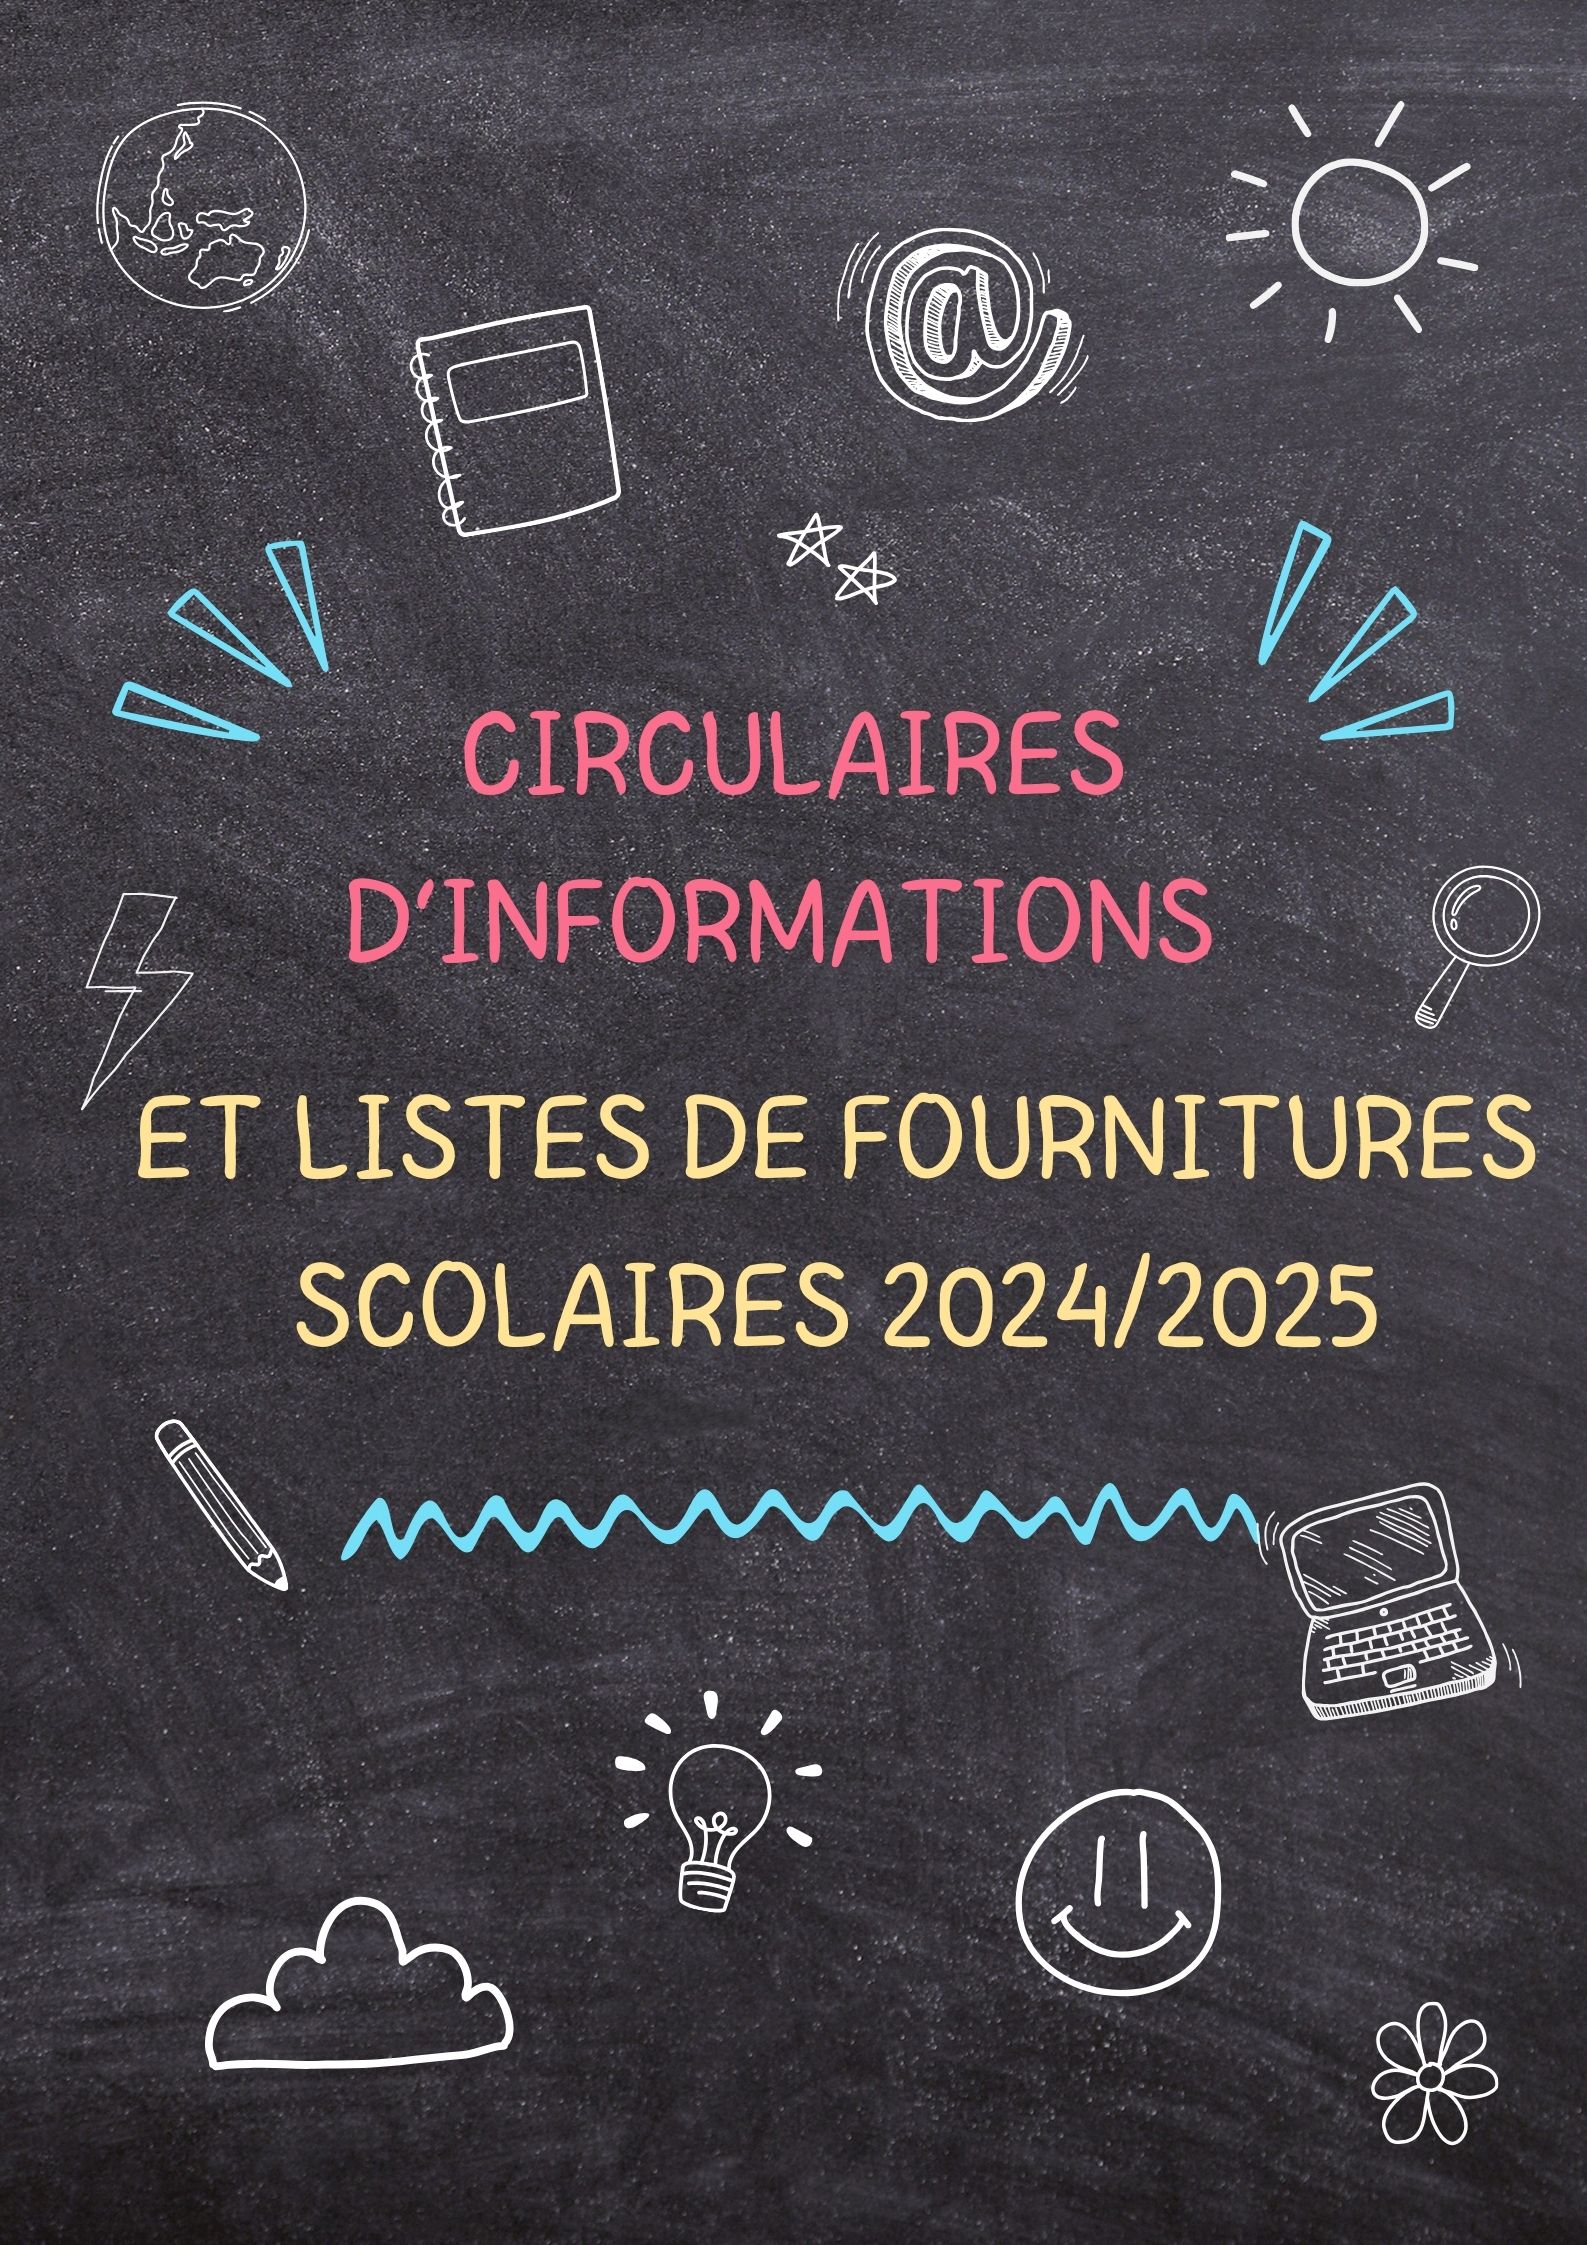 You are currently viewing Circulaires d’informations et listes de fournitures scolaires 2024/2025